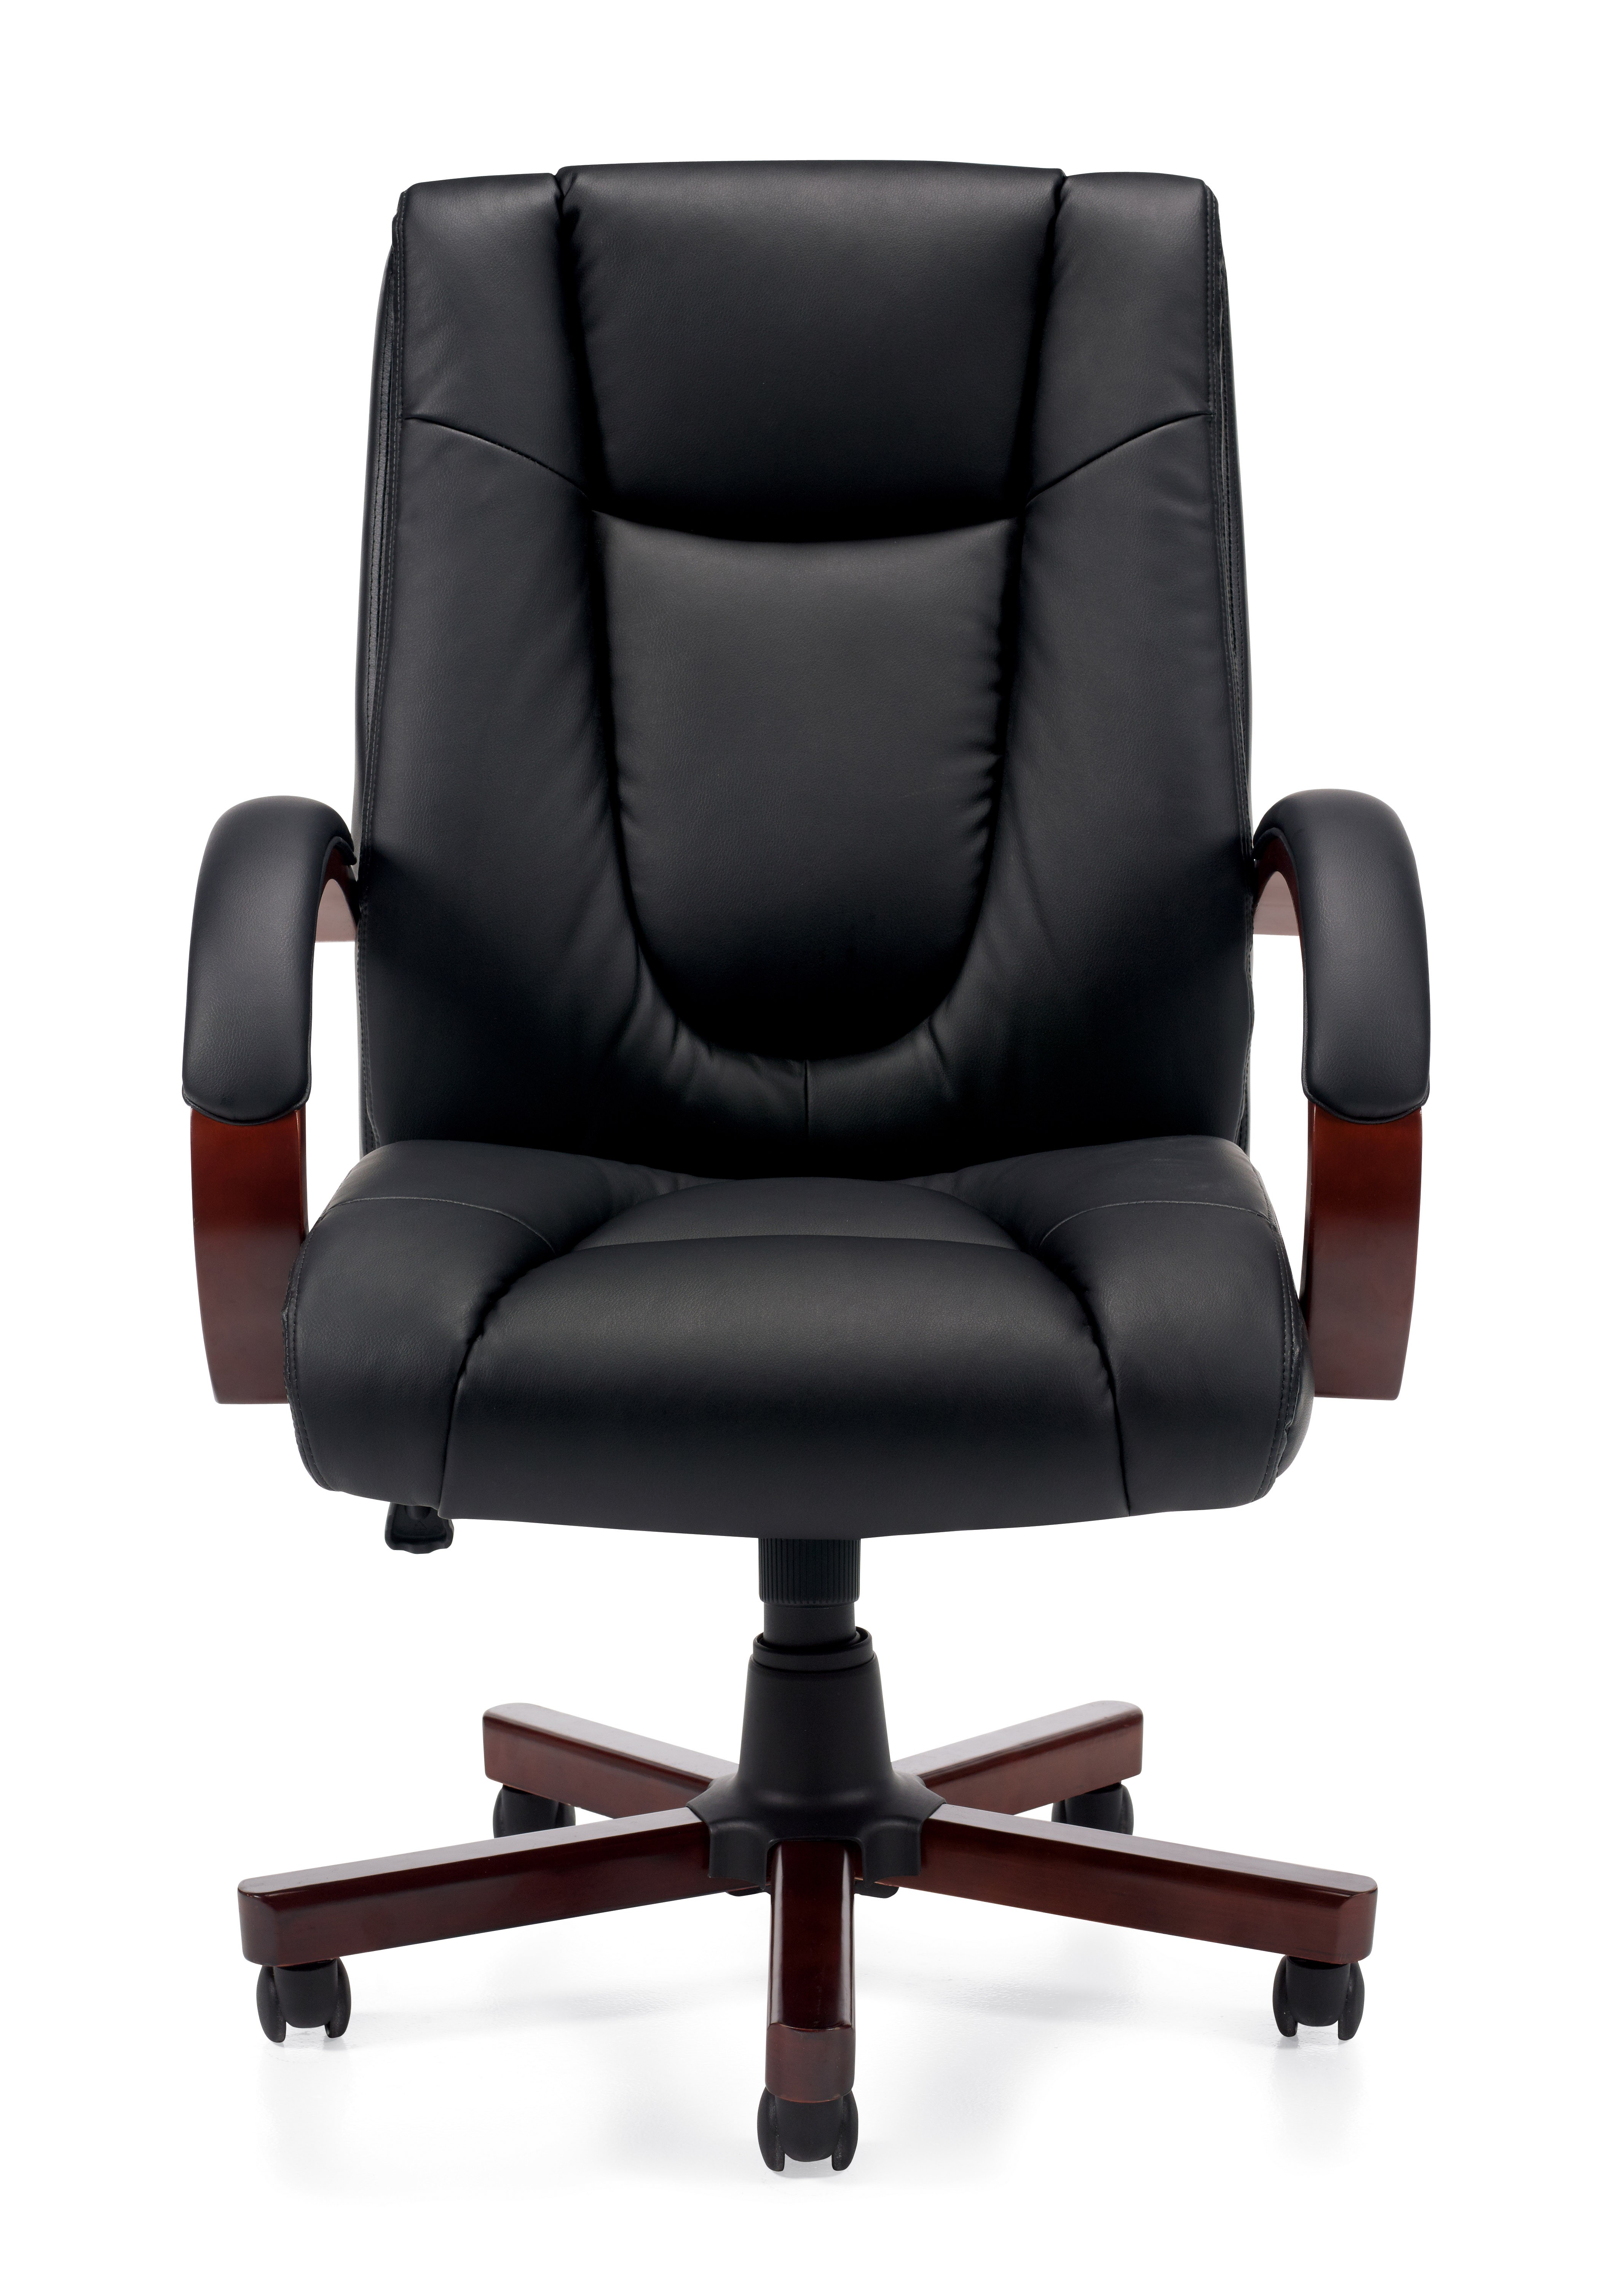 ﻿Luxhide Executive Chair with Wood Arms and Base